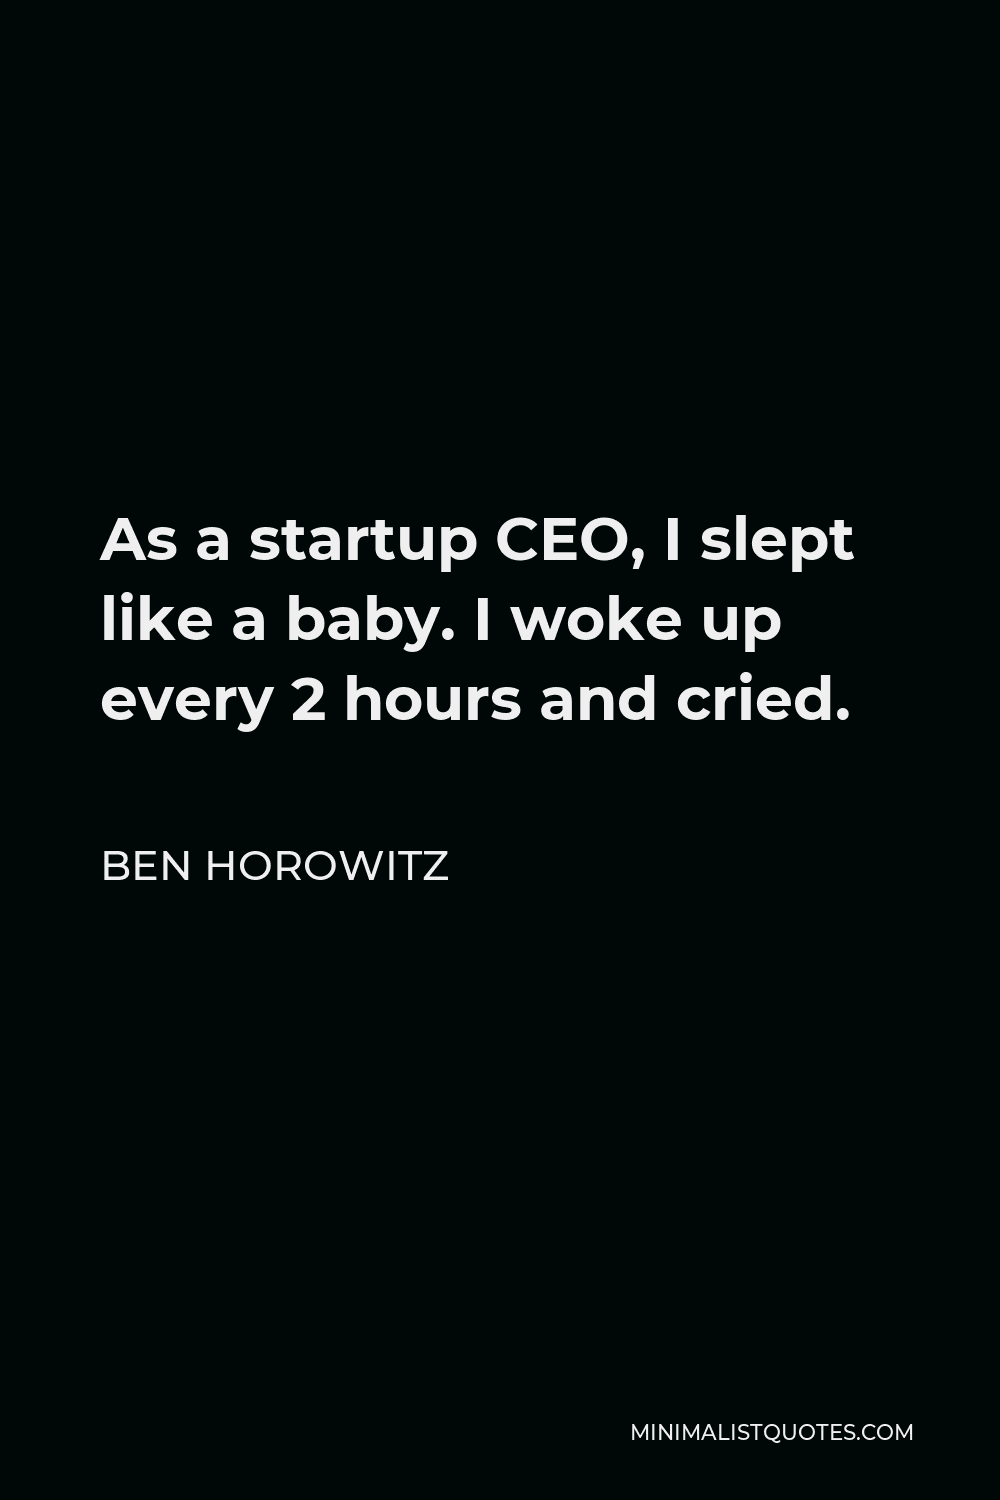 Ben Horowitz Quote - As a startup CEO, I slept like a baby. I woke up every 2 hours and cried.